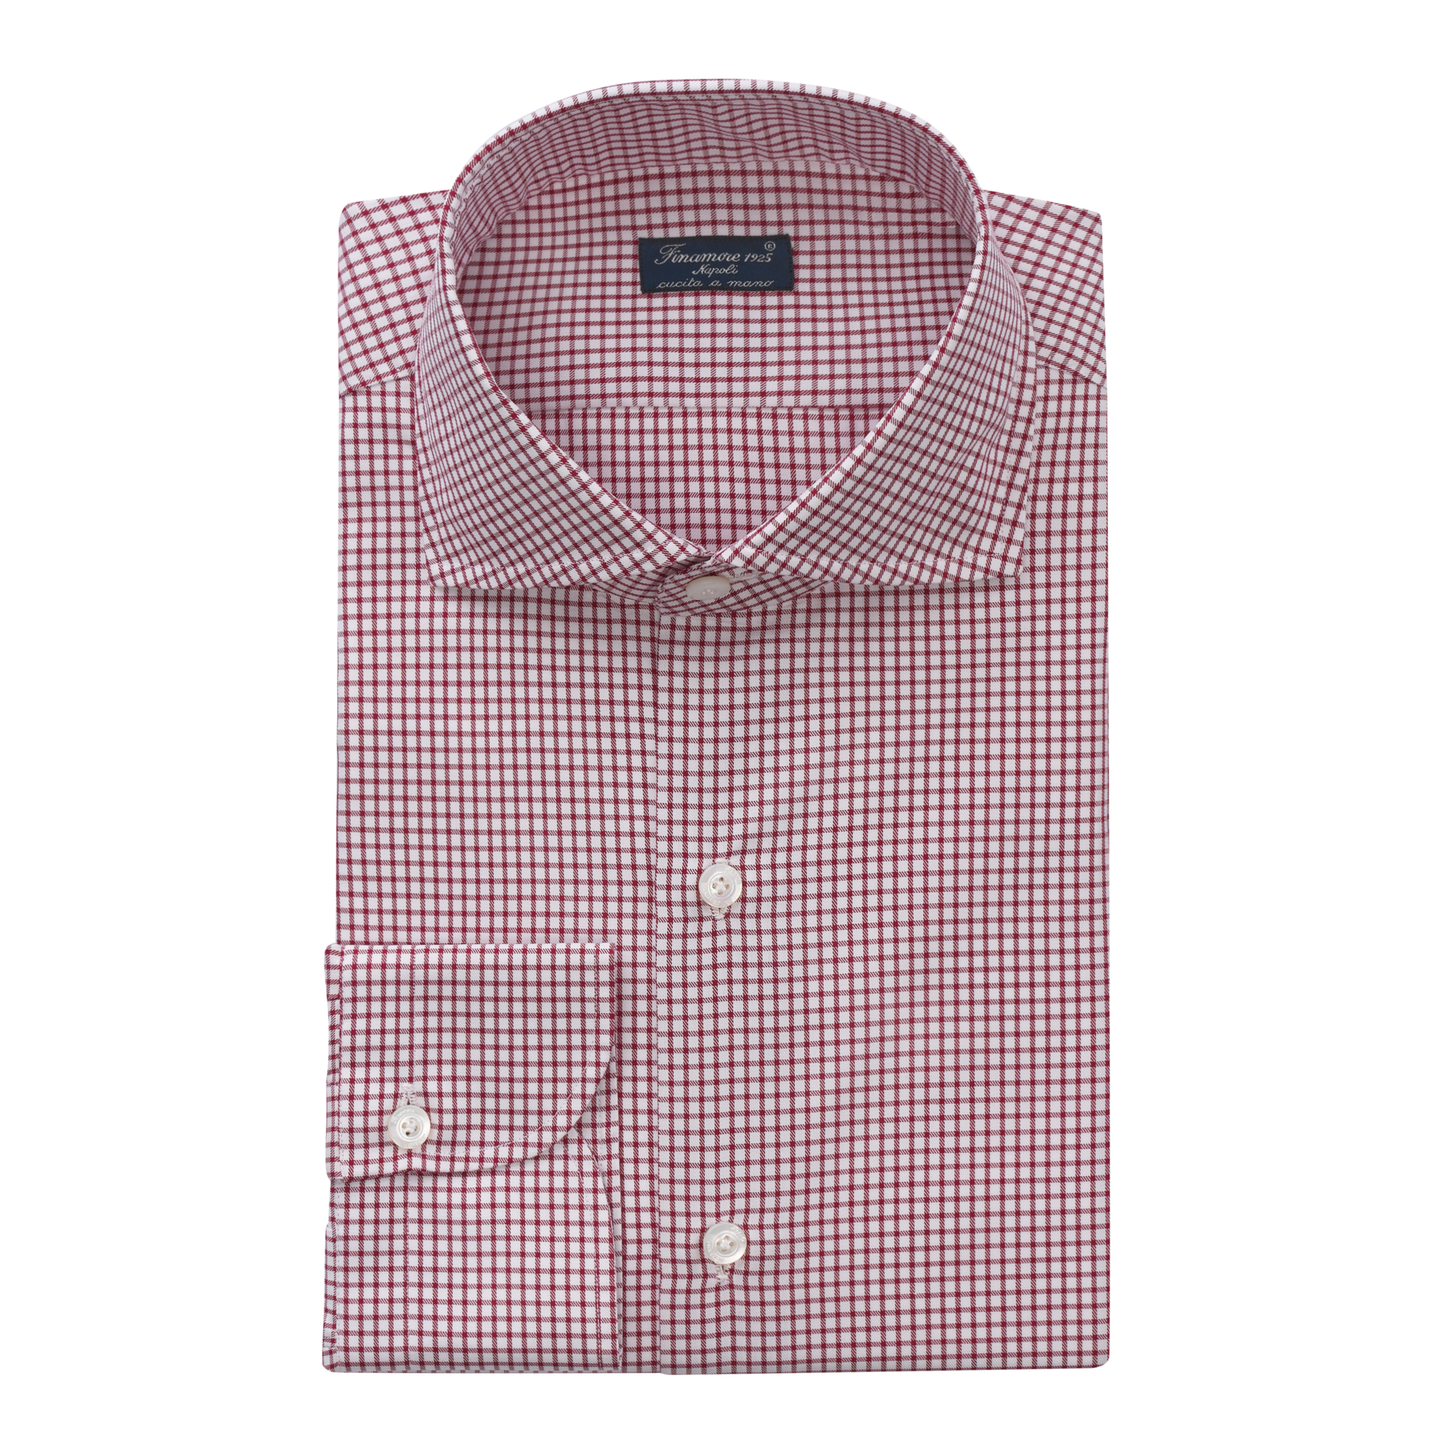 Finamore Checked Cotton Shirt in Wine Red - SARTALE